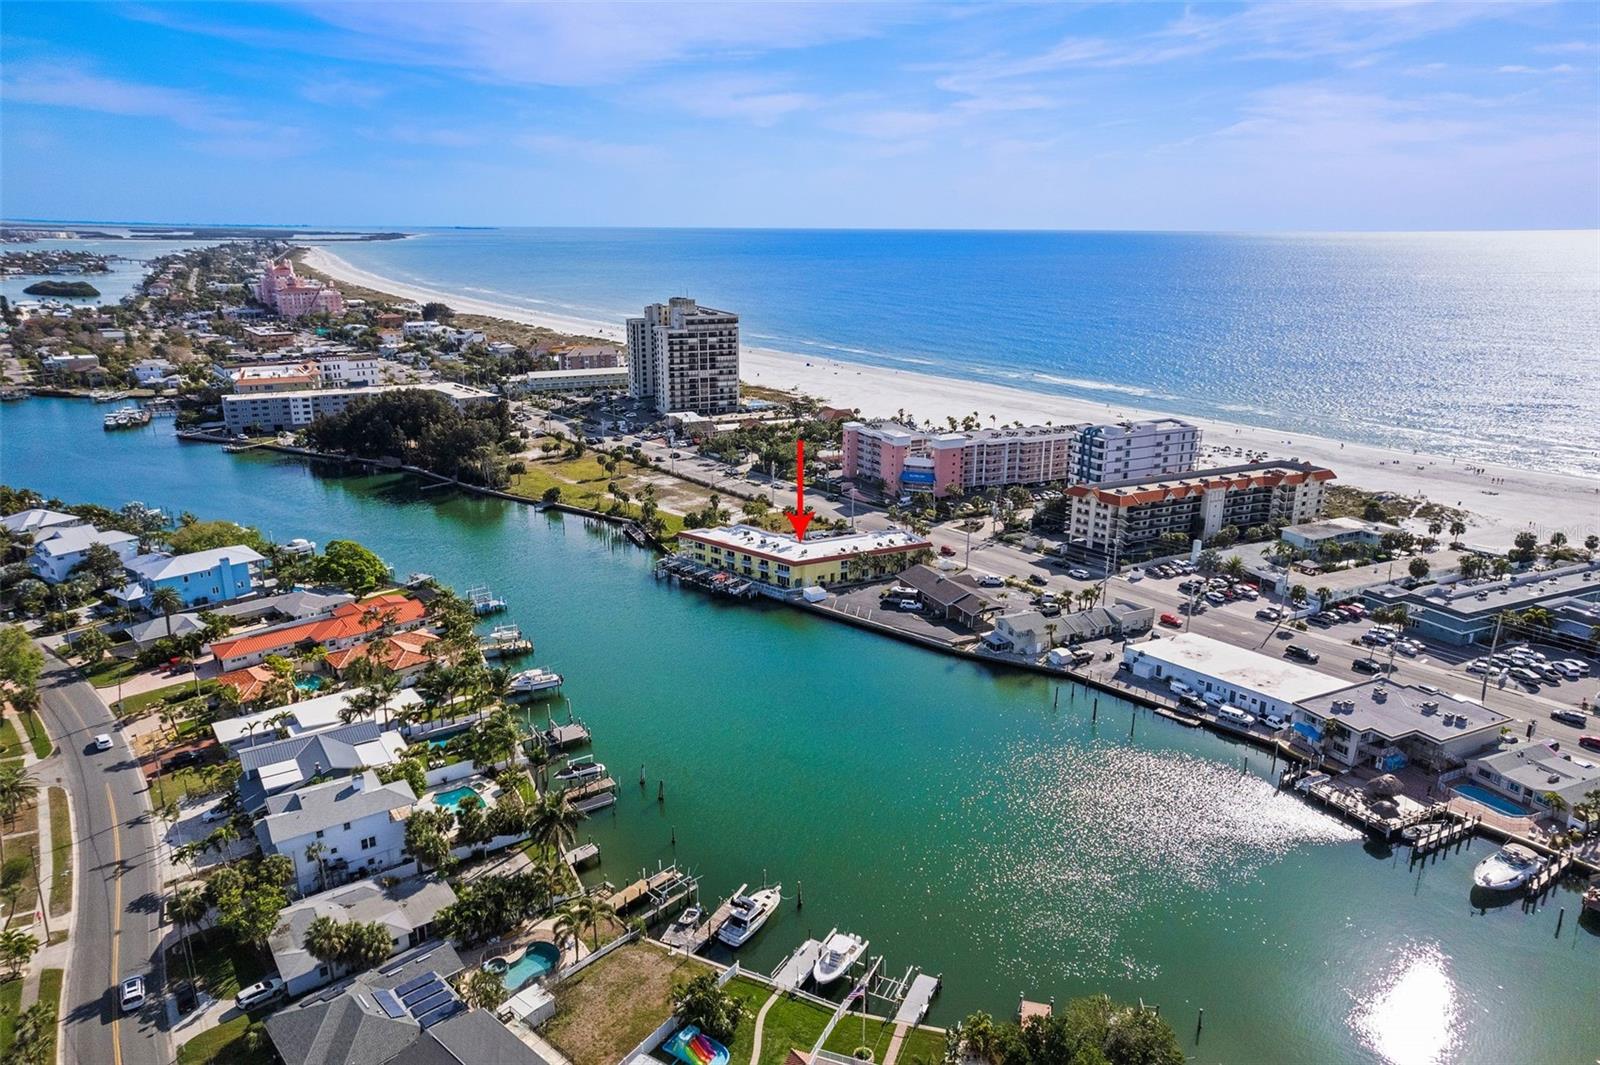 Most importantly, the beach is right across Gulf Blvd, with a public beach access point, literally just a few steps to the north of the property on the west side of the street.